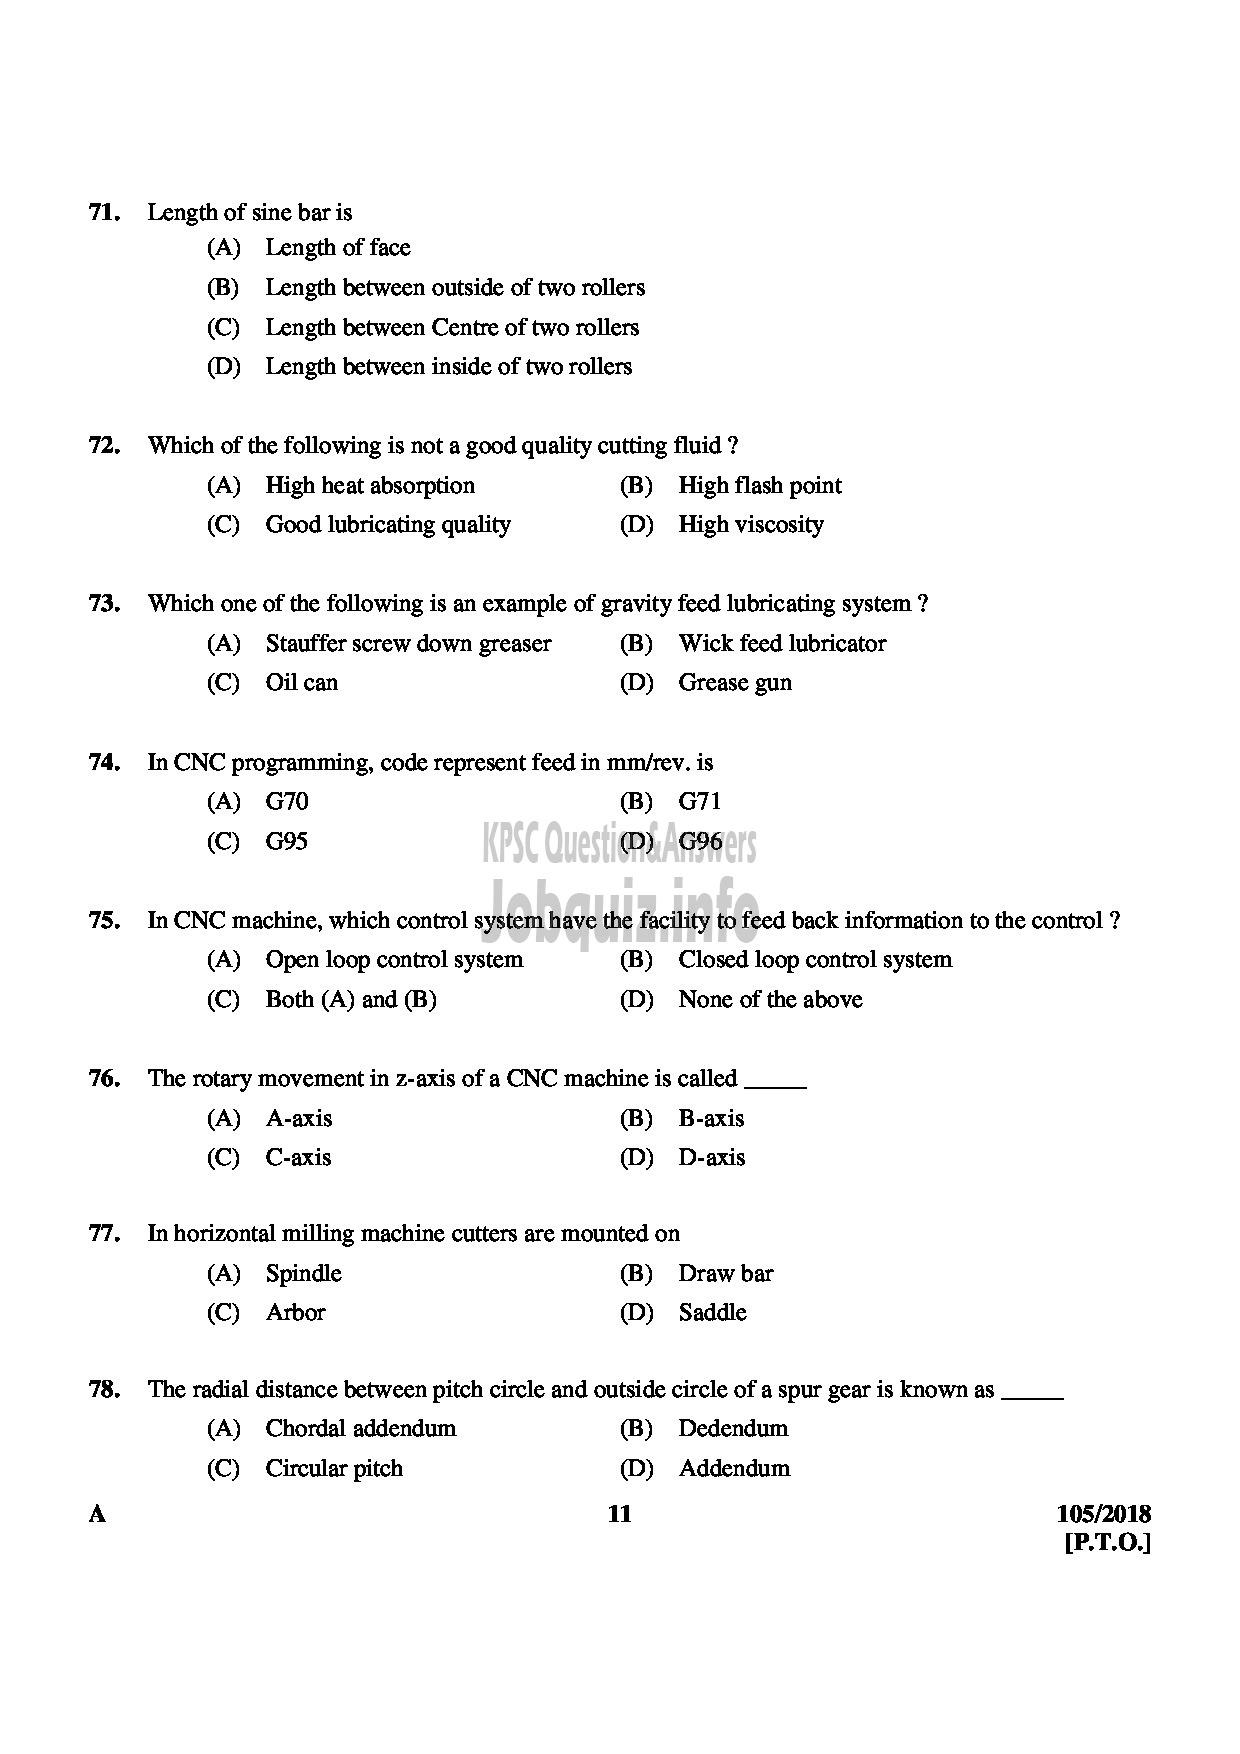 Kerala PSC Question Paper - JUNIOR INSTRUCTOR MACHINIST INDUSTRIAL TRAINING English -11